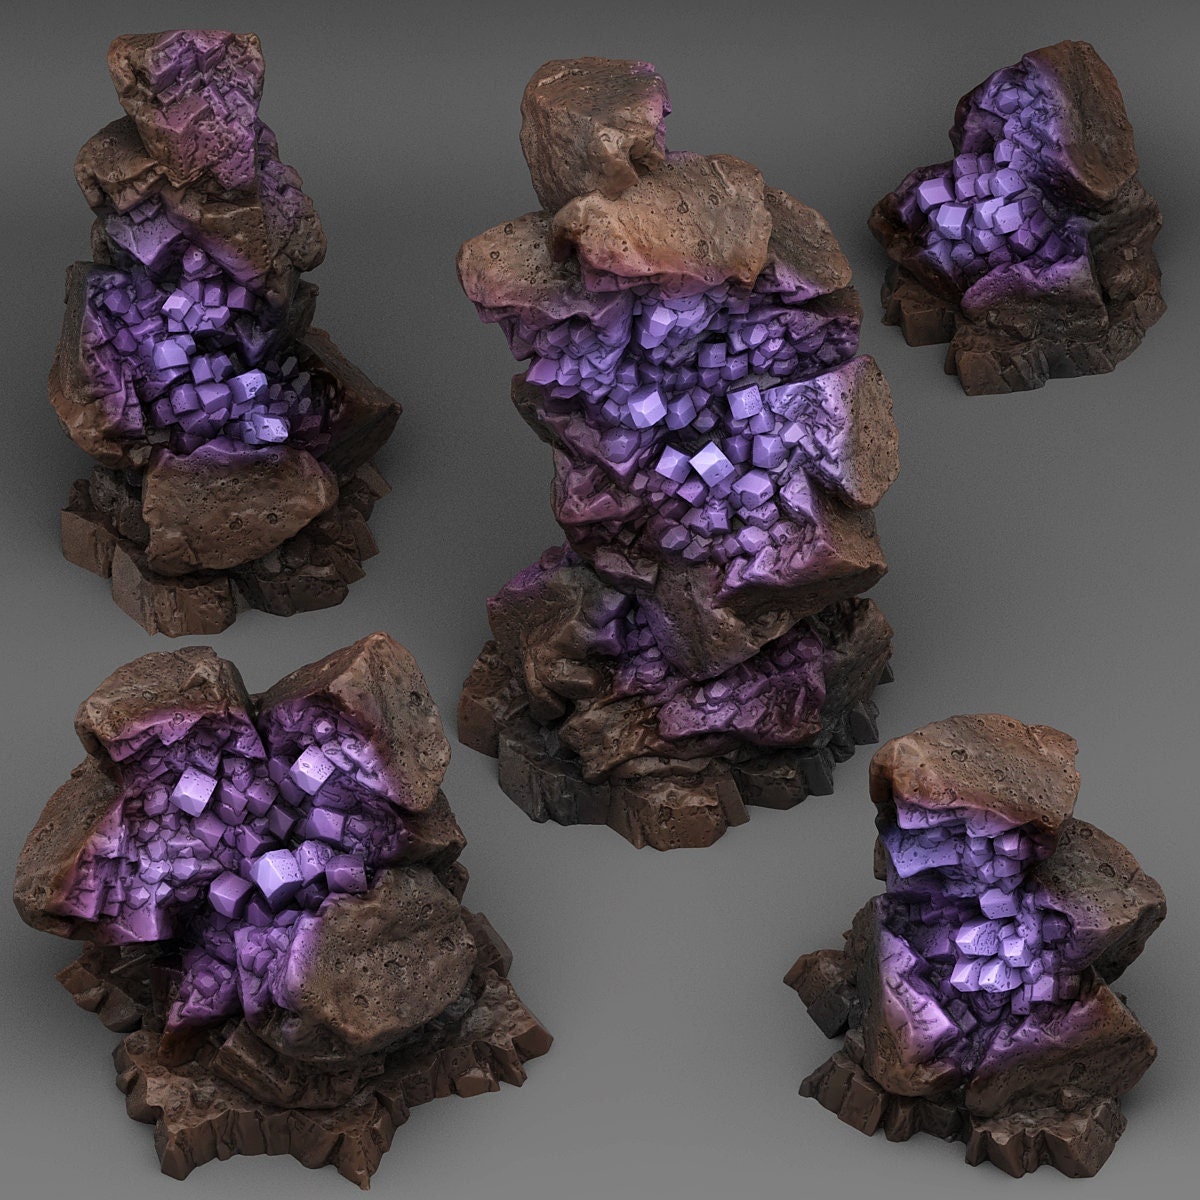 Ancient Hidden Crystals | Scenery and terrain | 3D Printed Resin Miniature | Tabletop Role Playing | AoS | D&D | 40K | Pathfinder